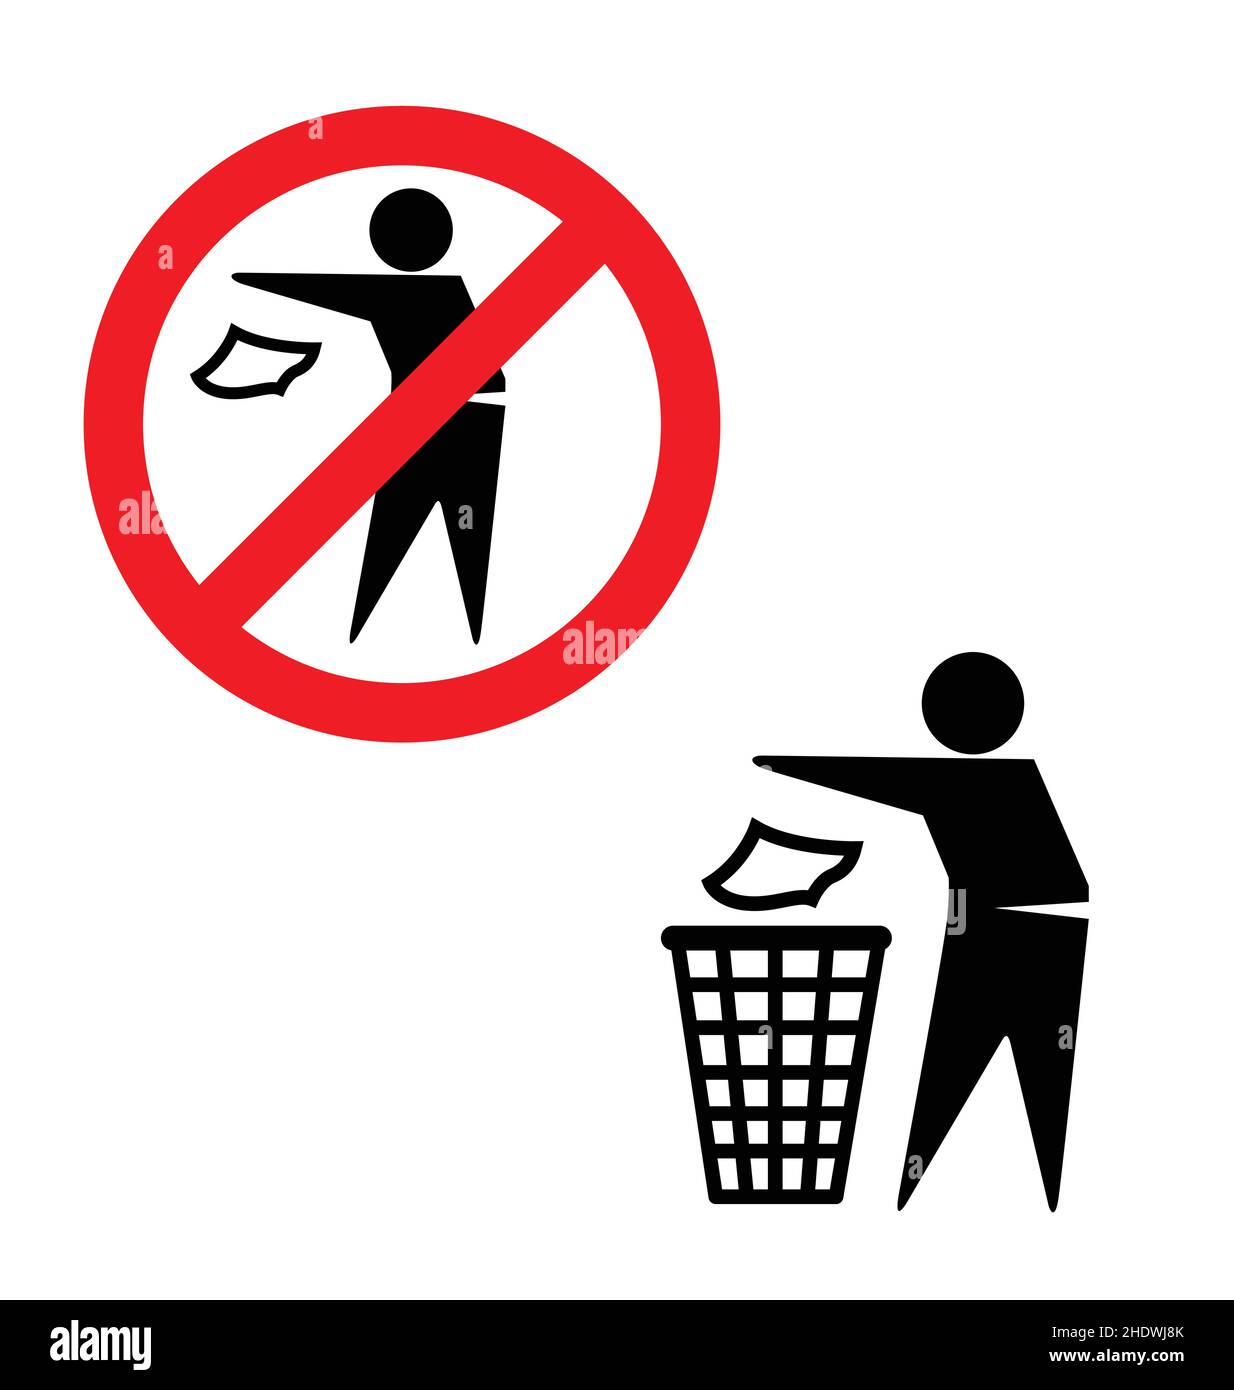 do not litter no littering sign man putting trash rubbish in the bin waste paper basket symbol icon logo simple vector isolated on white background Stock Vector